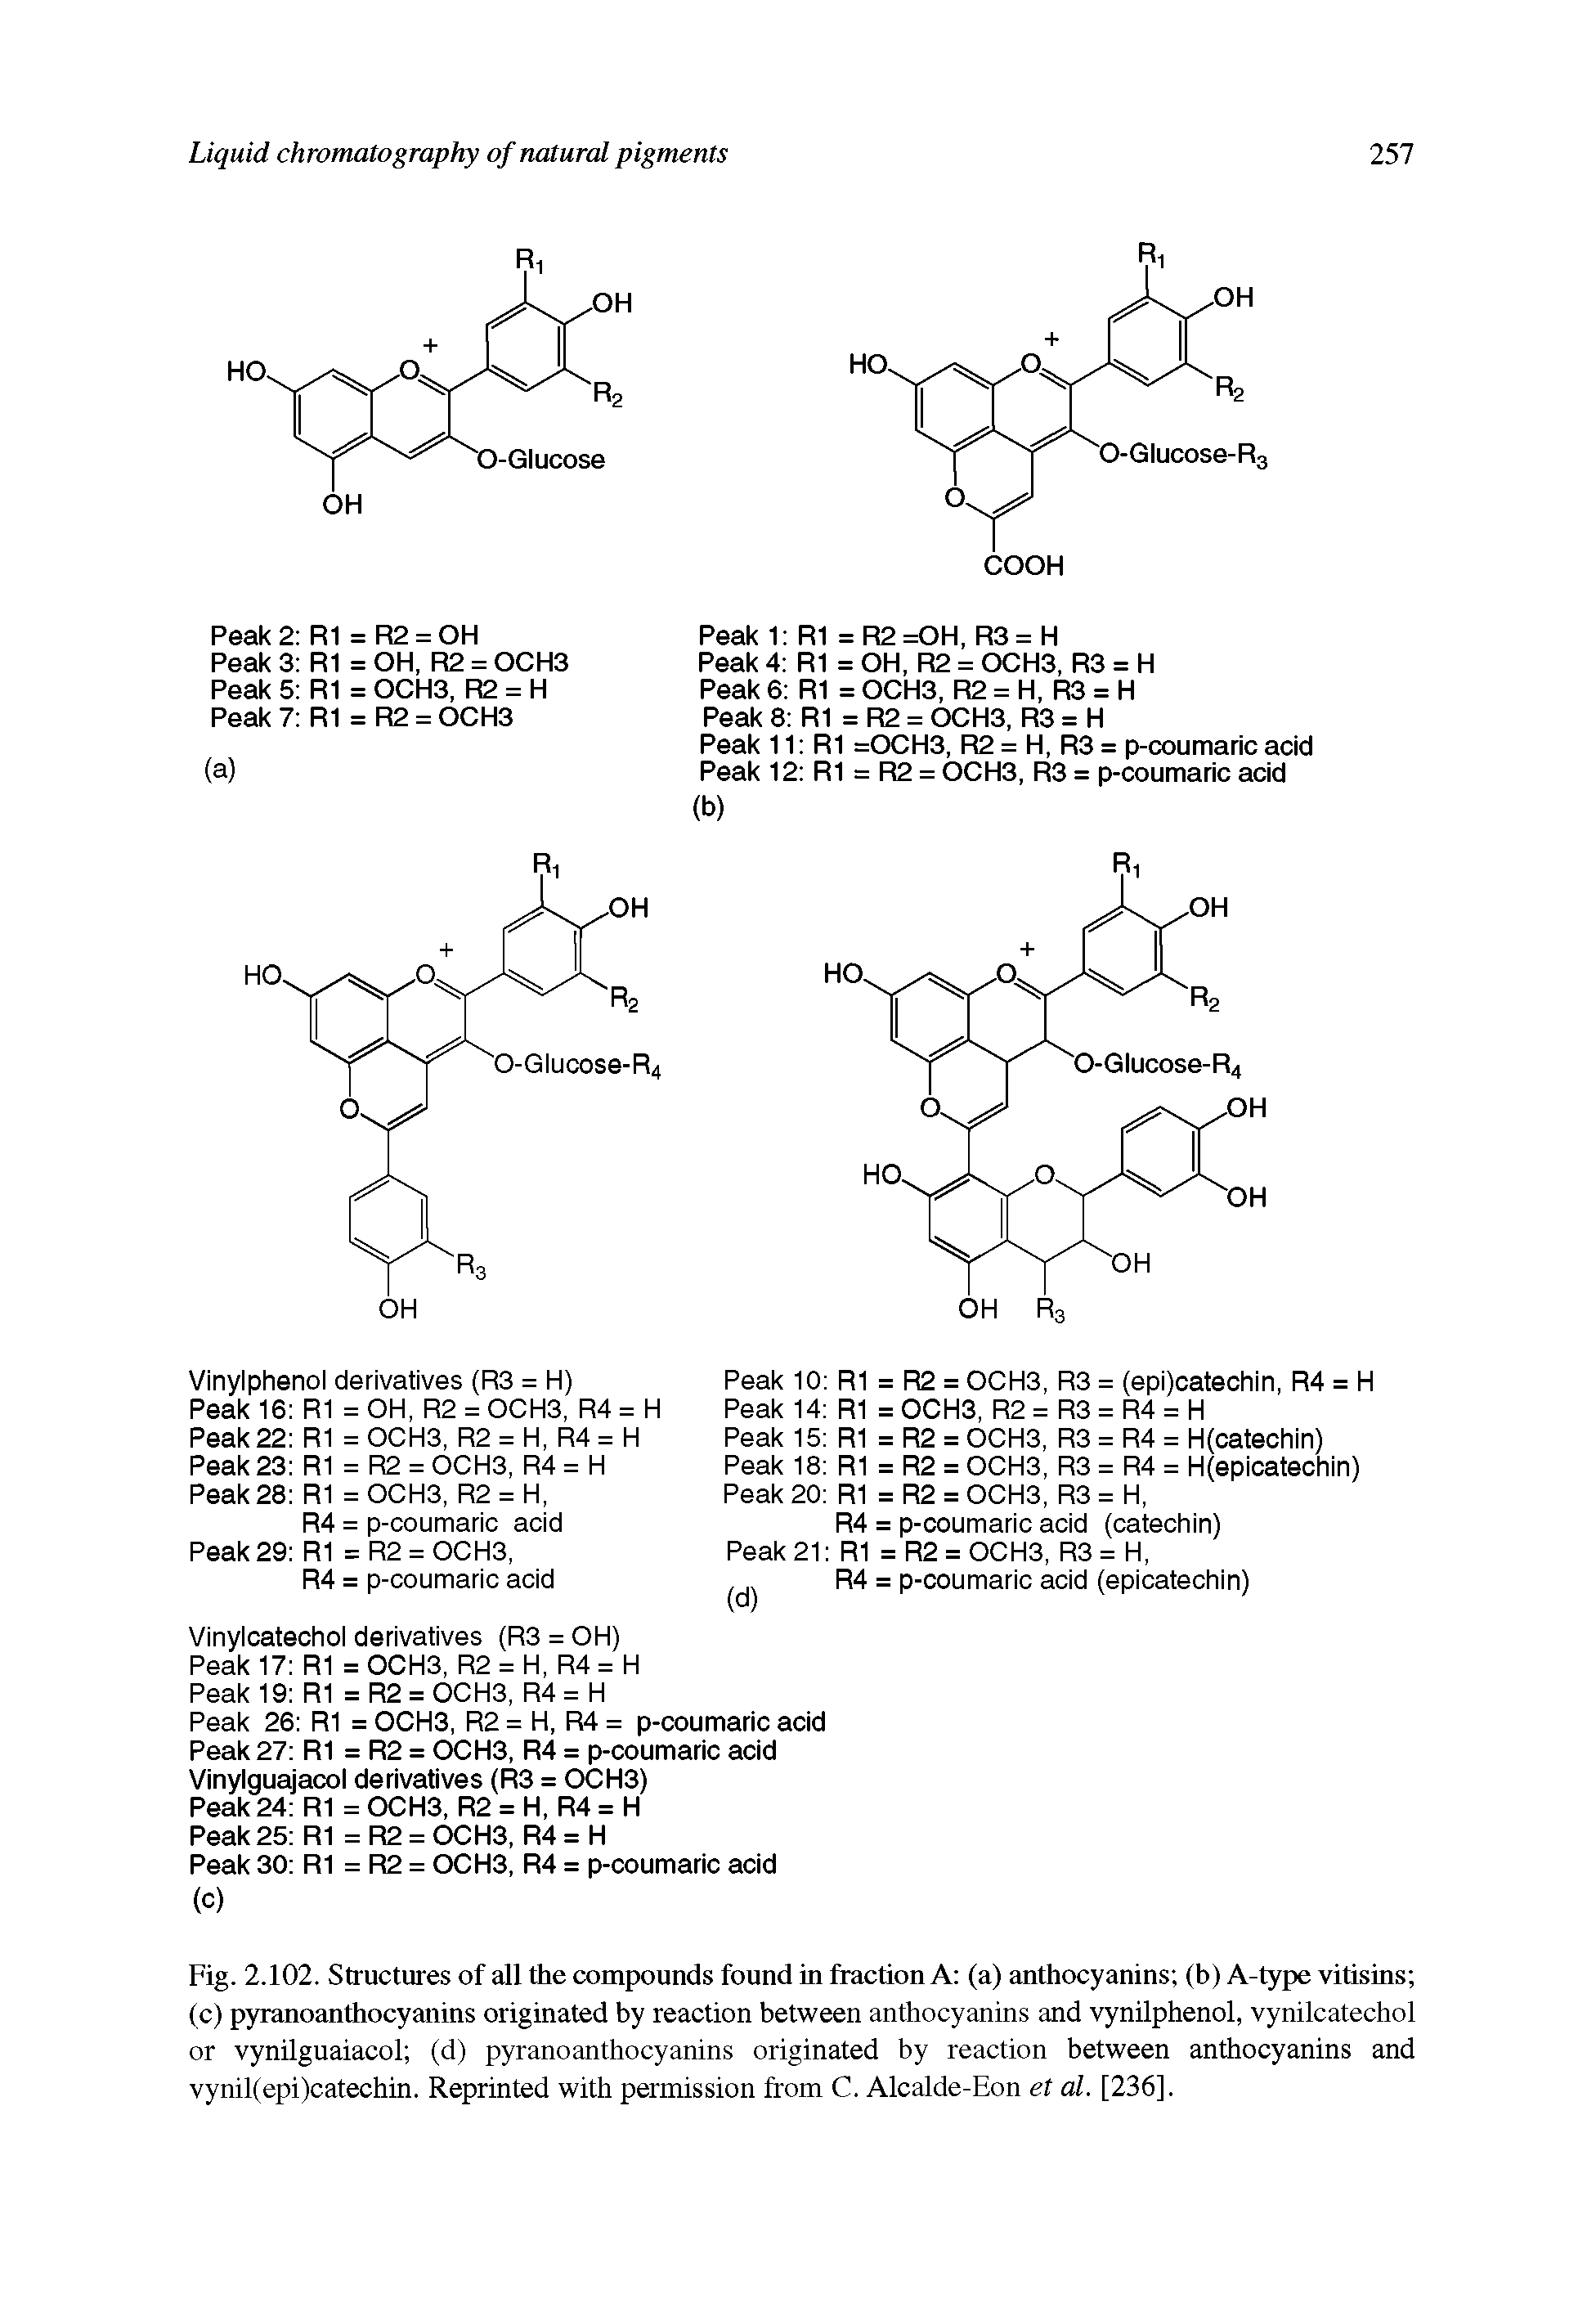 Fig. 2.102. Structures of all the compounds found in fraction A (a) anthocyanins (b) A-type vitisins (c) pyranoanthocyanins originated by reaction between anthocyanins and vynilphenol, vynilcatechol or vynilguaiacol (d) pyranoanthocyanins originated by reaction between anthocyanins and vynil(epi)catechin. Reprinted with permission from C. Alcalde-Eon et al. [236],...